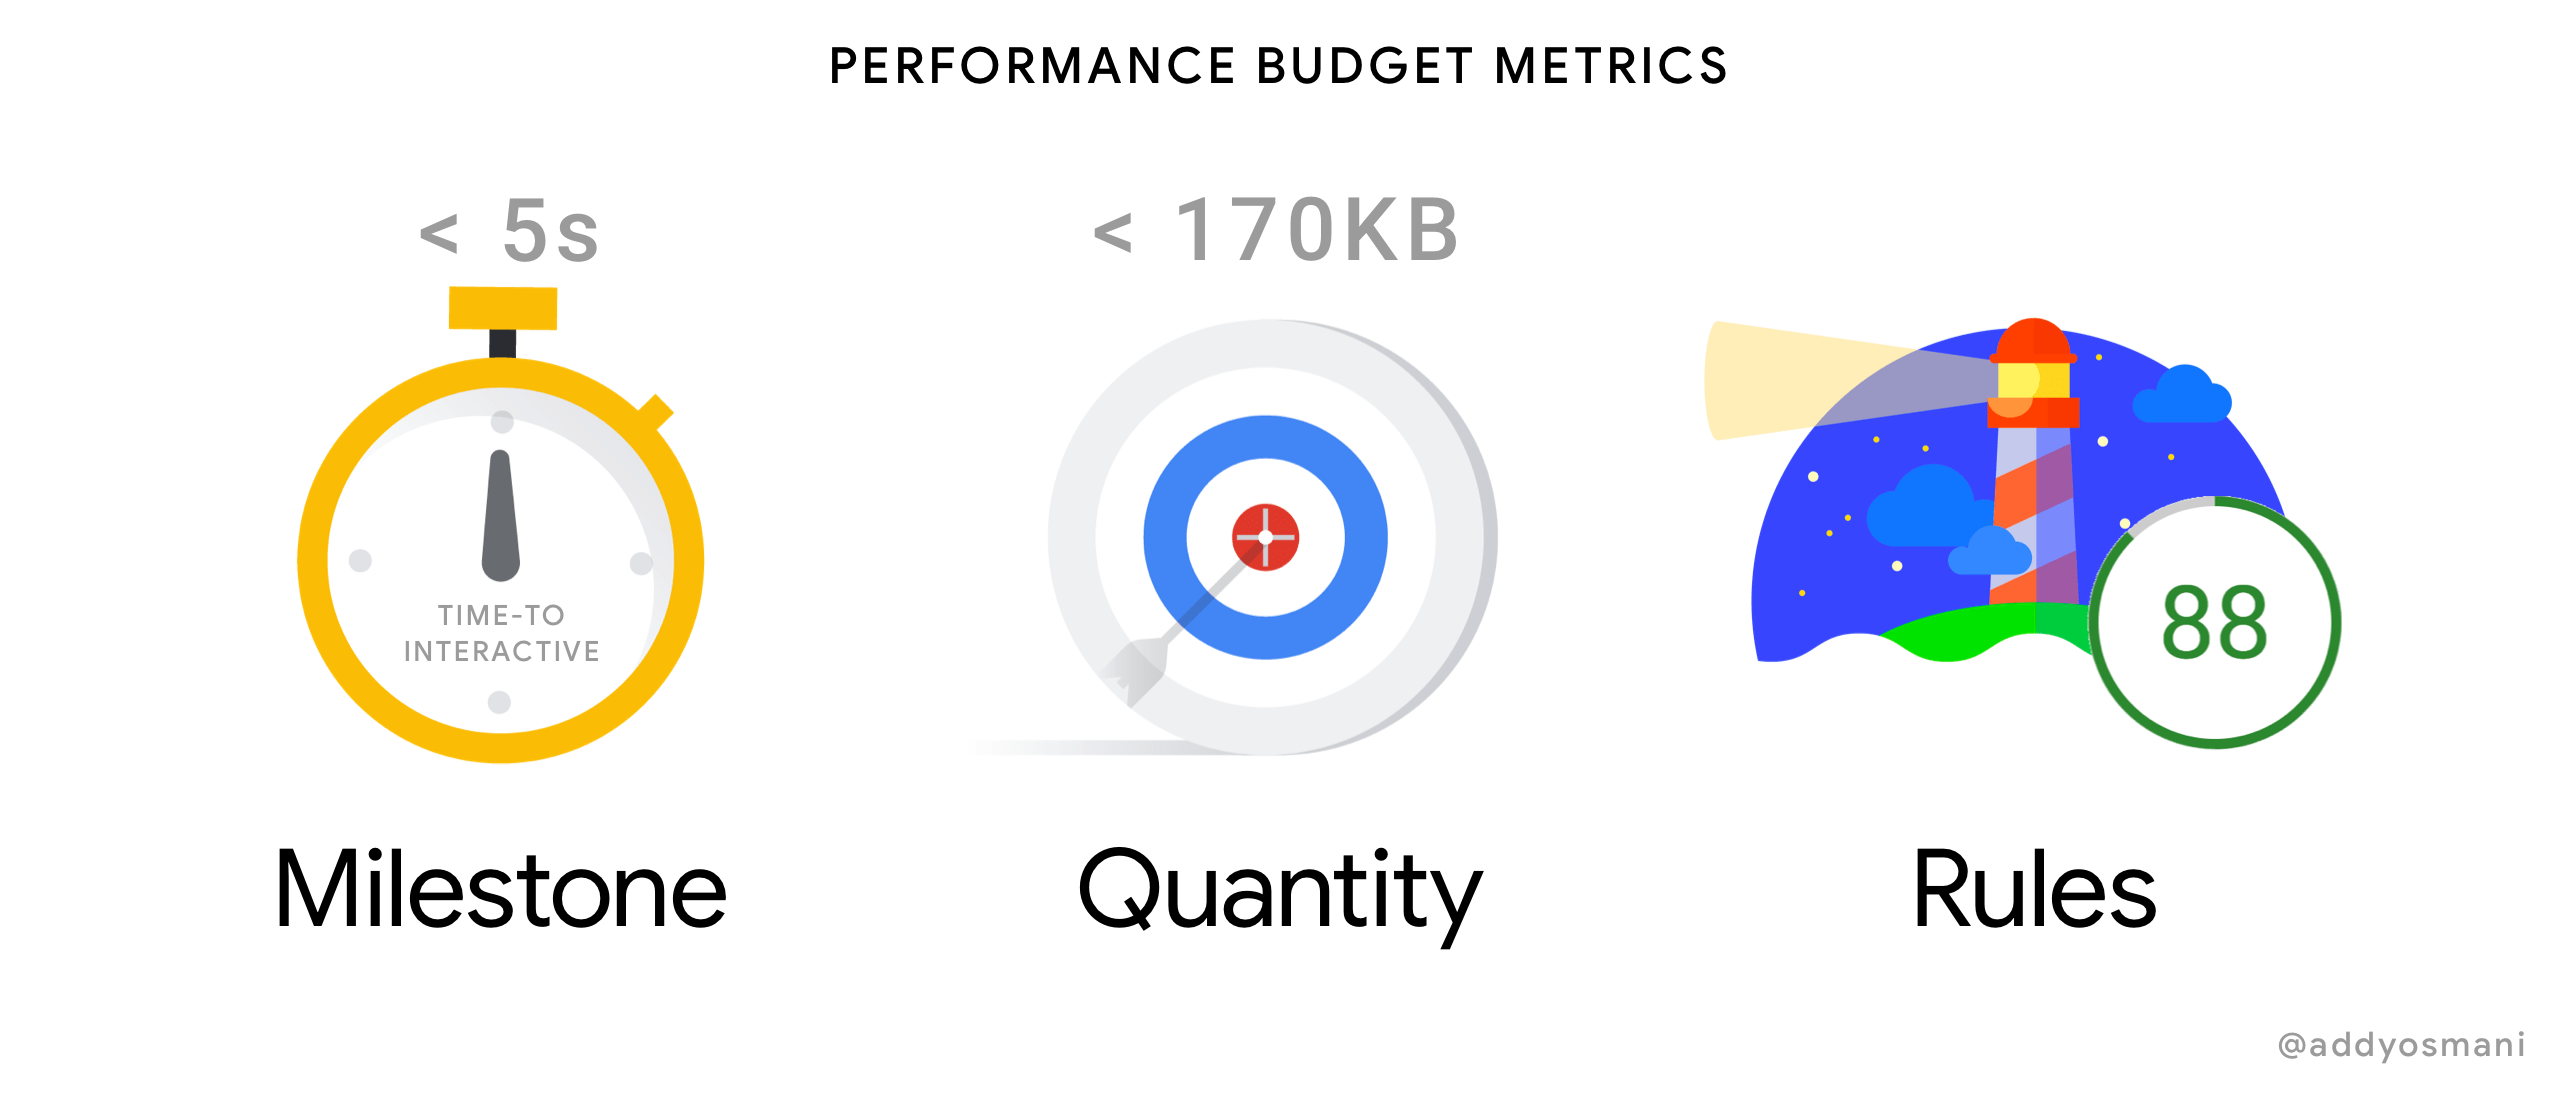 Performance Budget Images